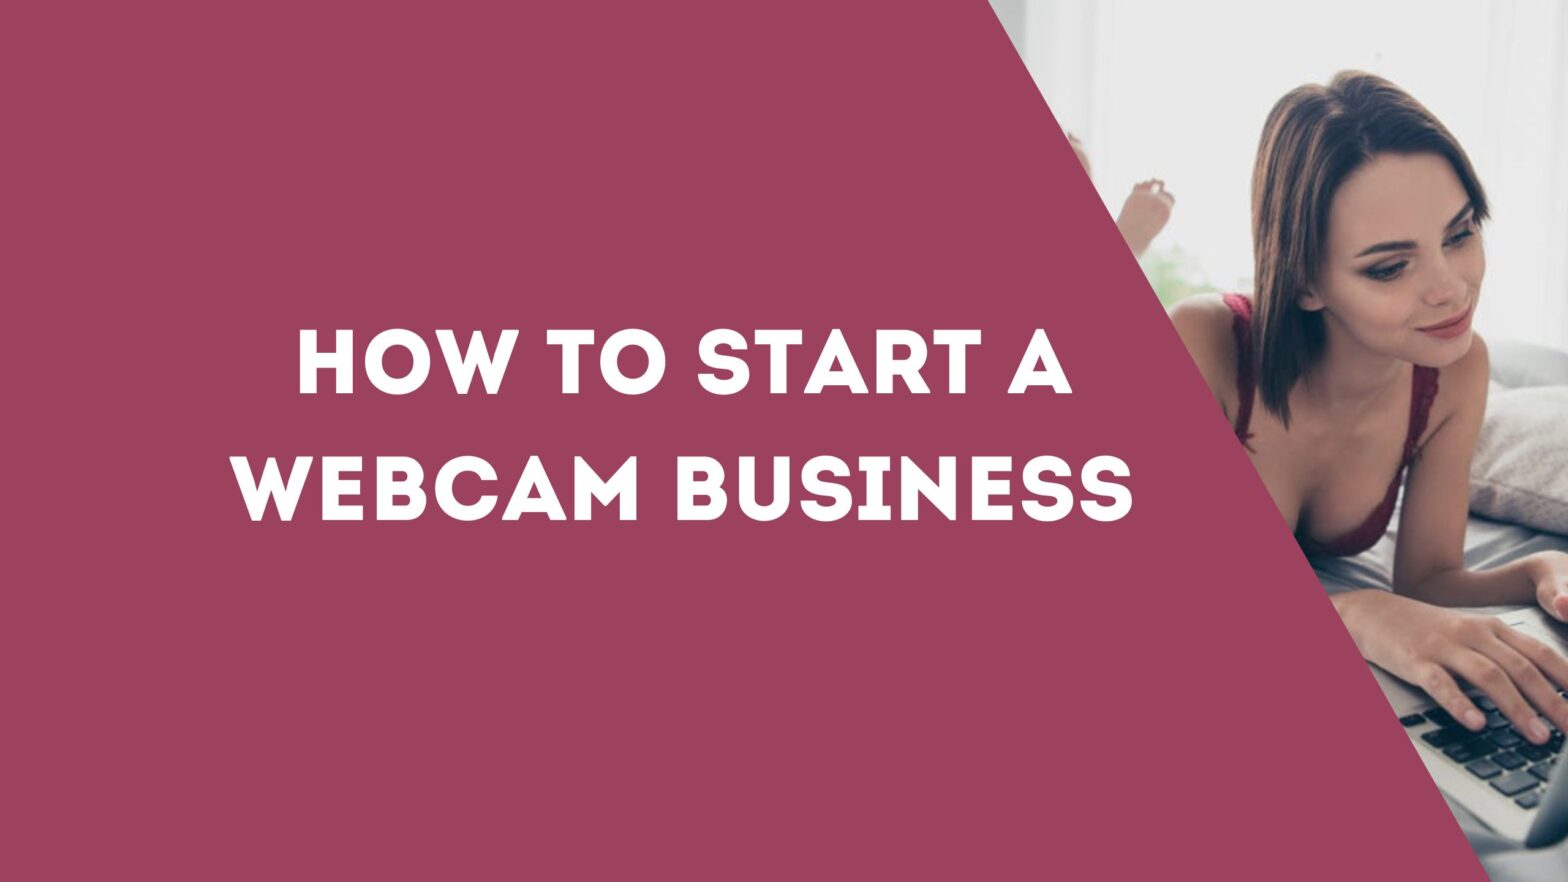 How to Start a Webcam Business